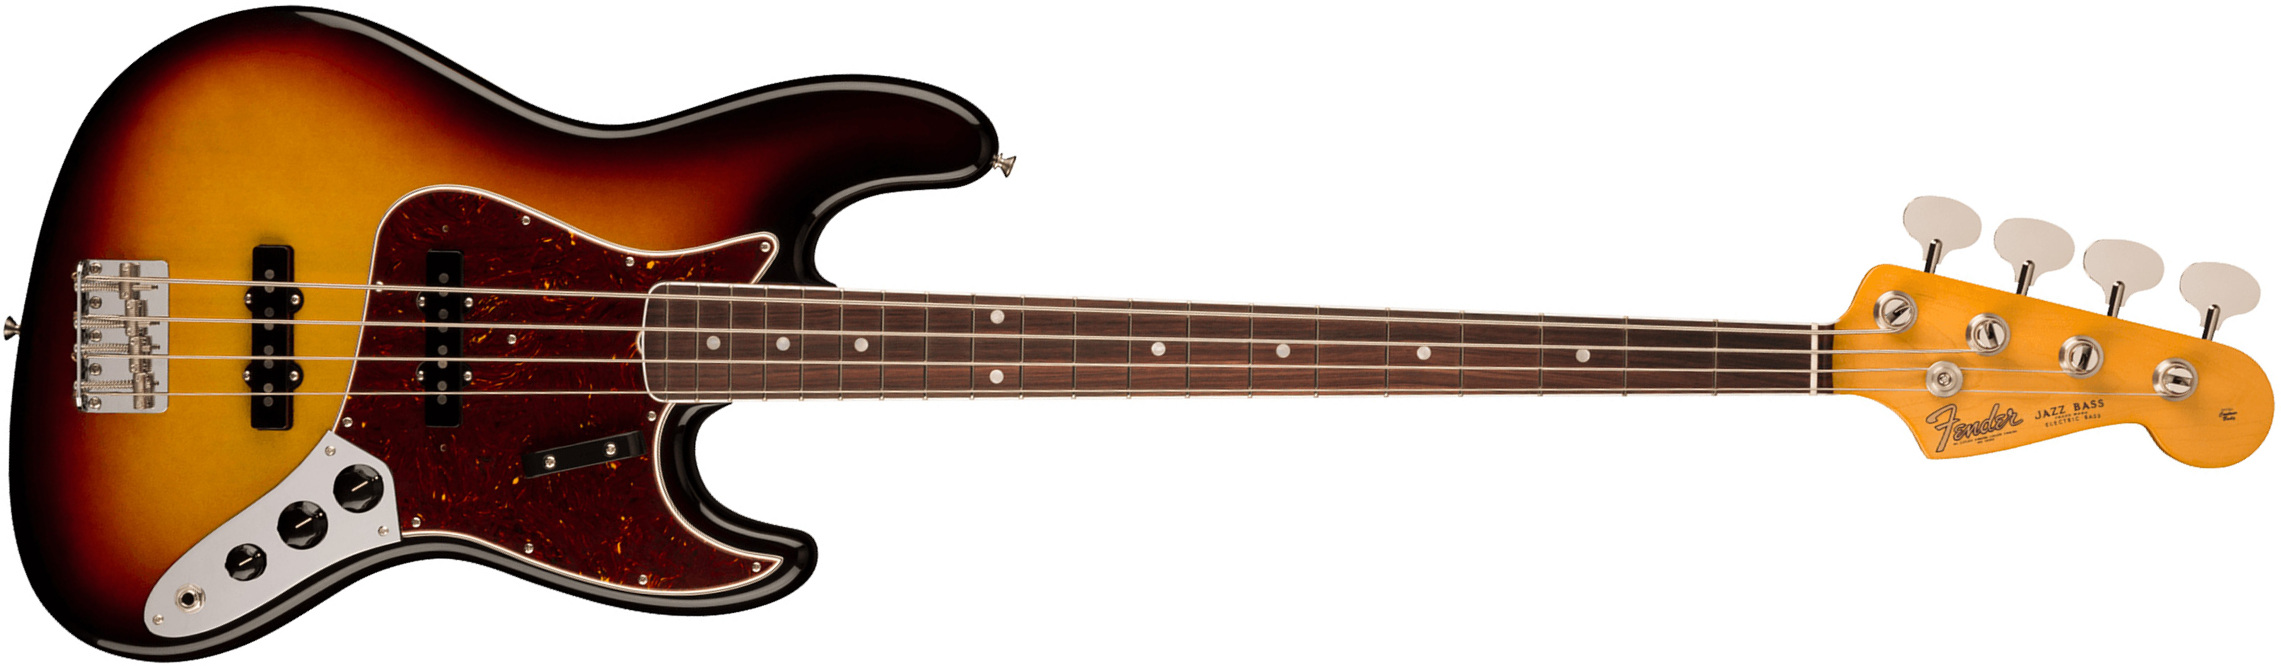 Fender Jazz Bass 1966 American Vintage Ii Usa Rw - 3-color Sunburst - Solid body electric bass - Main picture